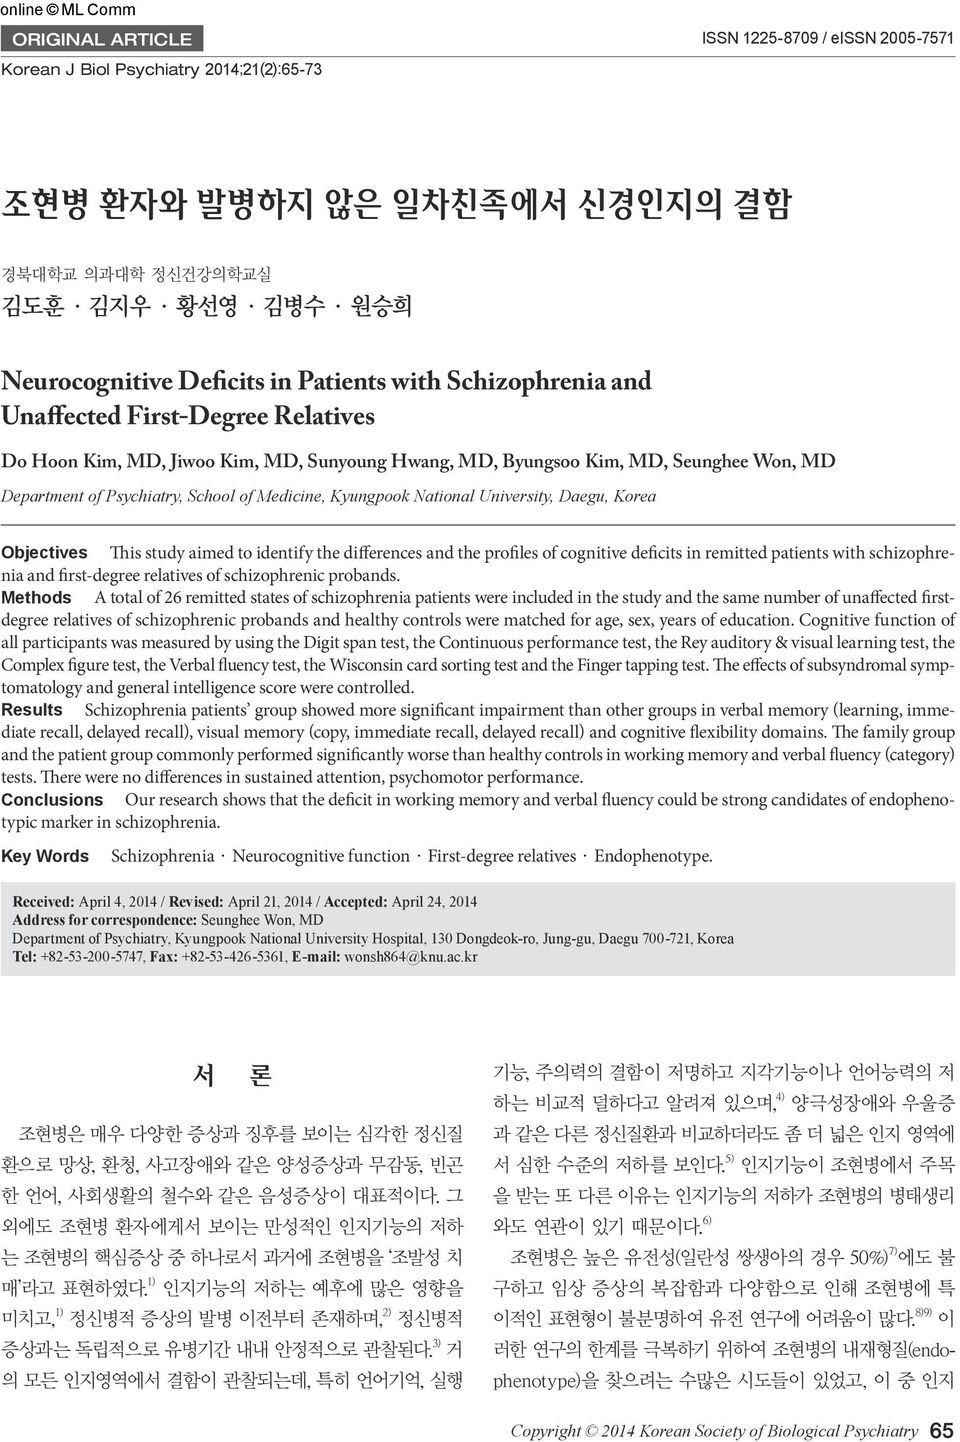 University, Daegu, Korea ObjectivesZZThis study aimed to identify the differences and the profiles of cognitive deficits in remitted patients with schizophrenia and first-degree relatives of